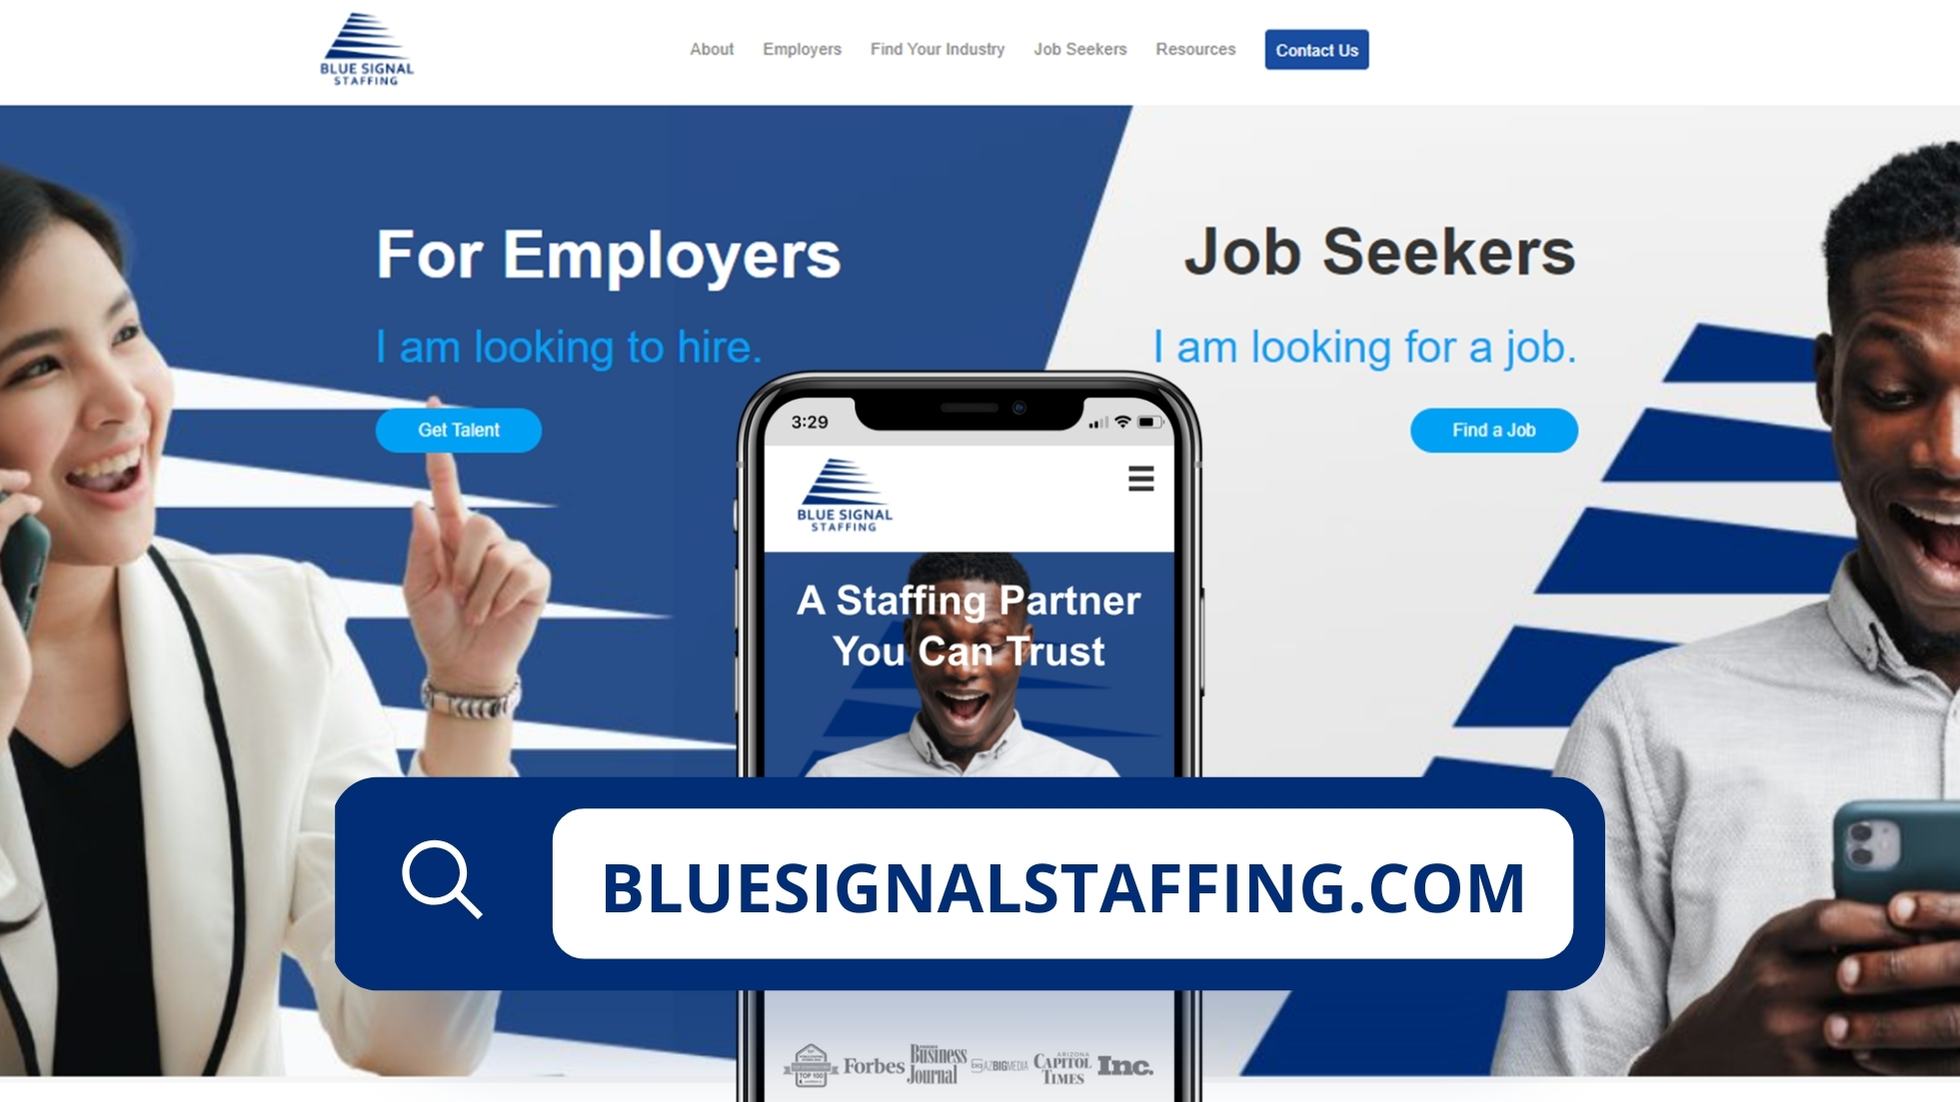 Blue Signal Staffing's homepage showcasing their services for employers and job seekers with a clear and engaging interface.